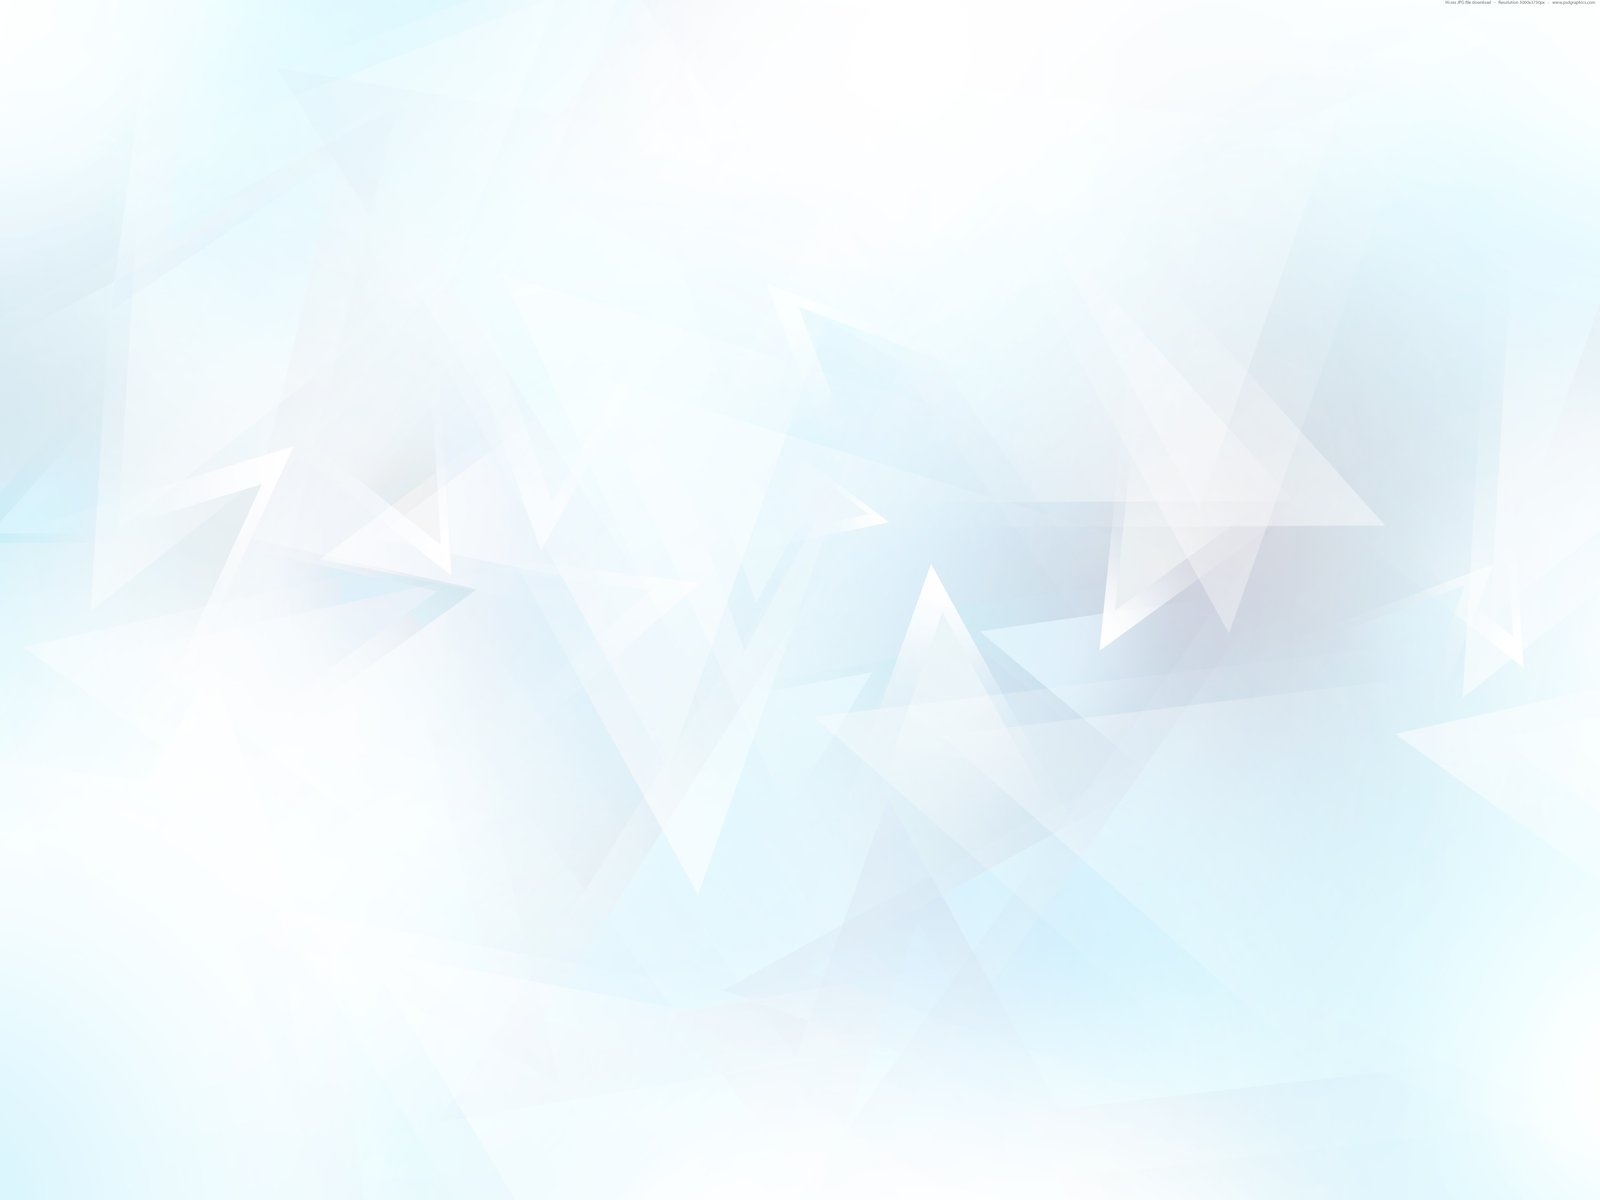 Download 470+ Background Abstract Sky Blue Paling Keren